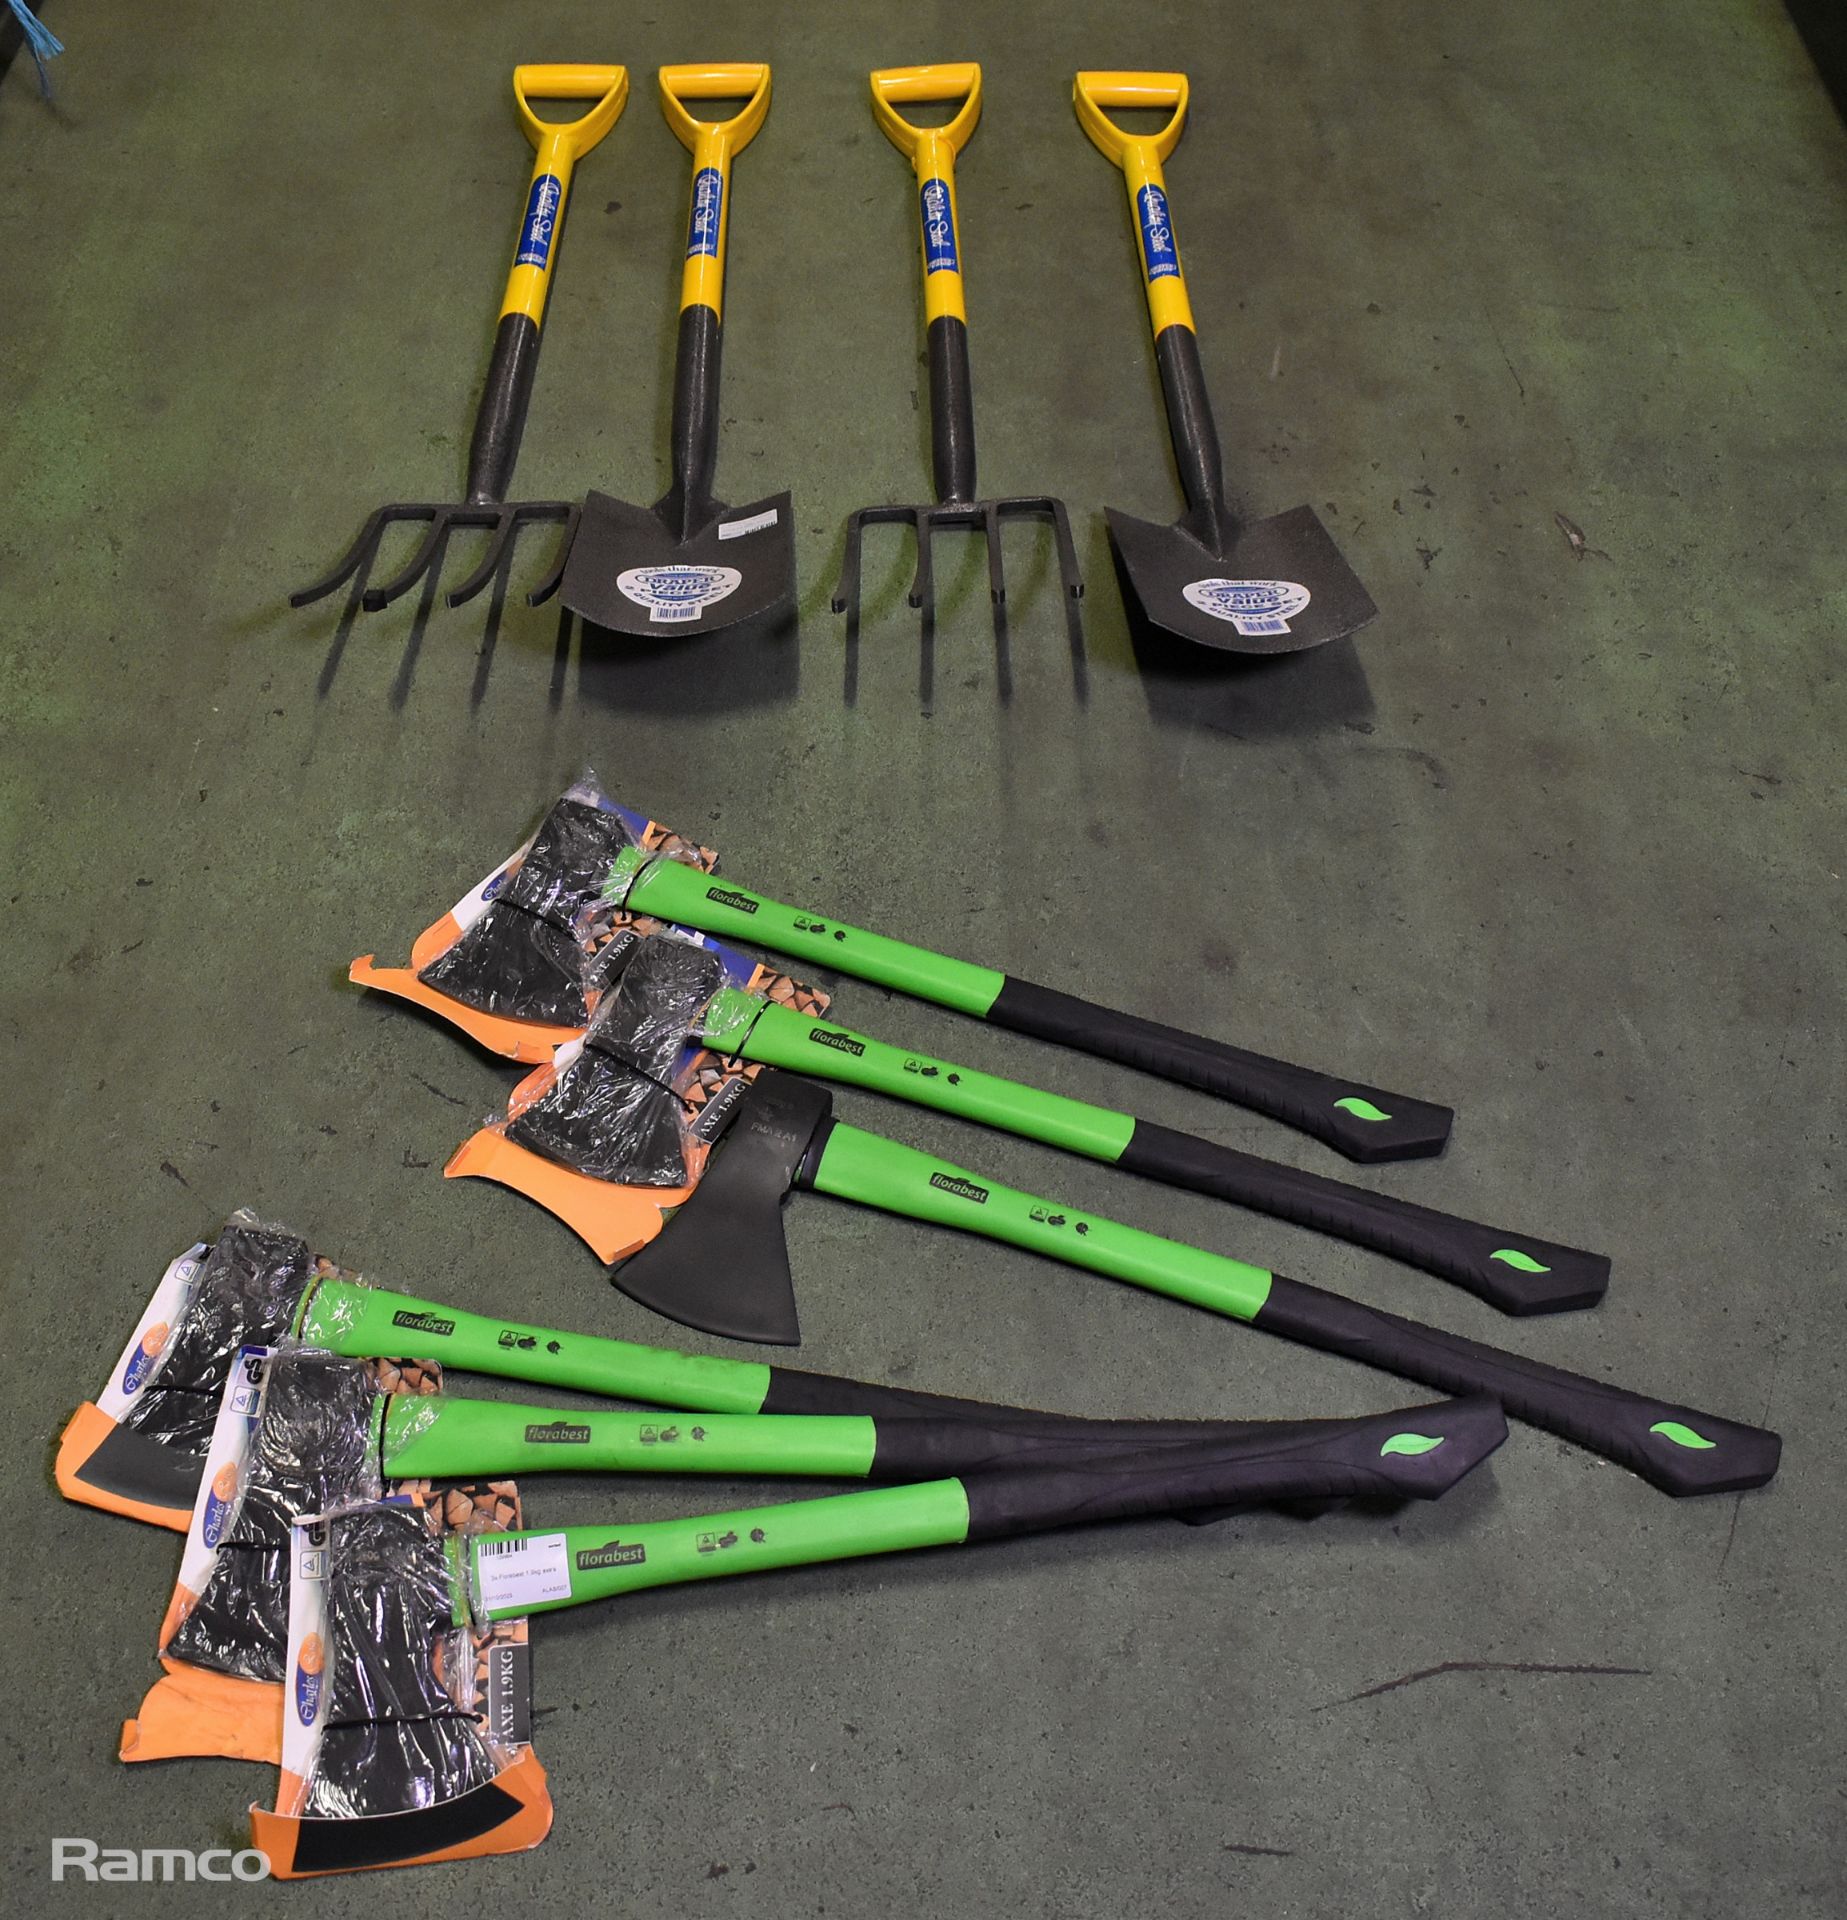 3x Charles Rose Florabest 1.9kg Axes, 2x Draper spade and shovel sets, 3x Charles Rose axes